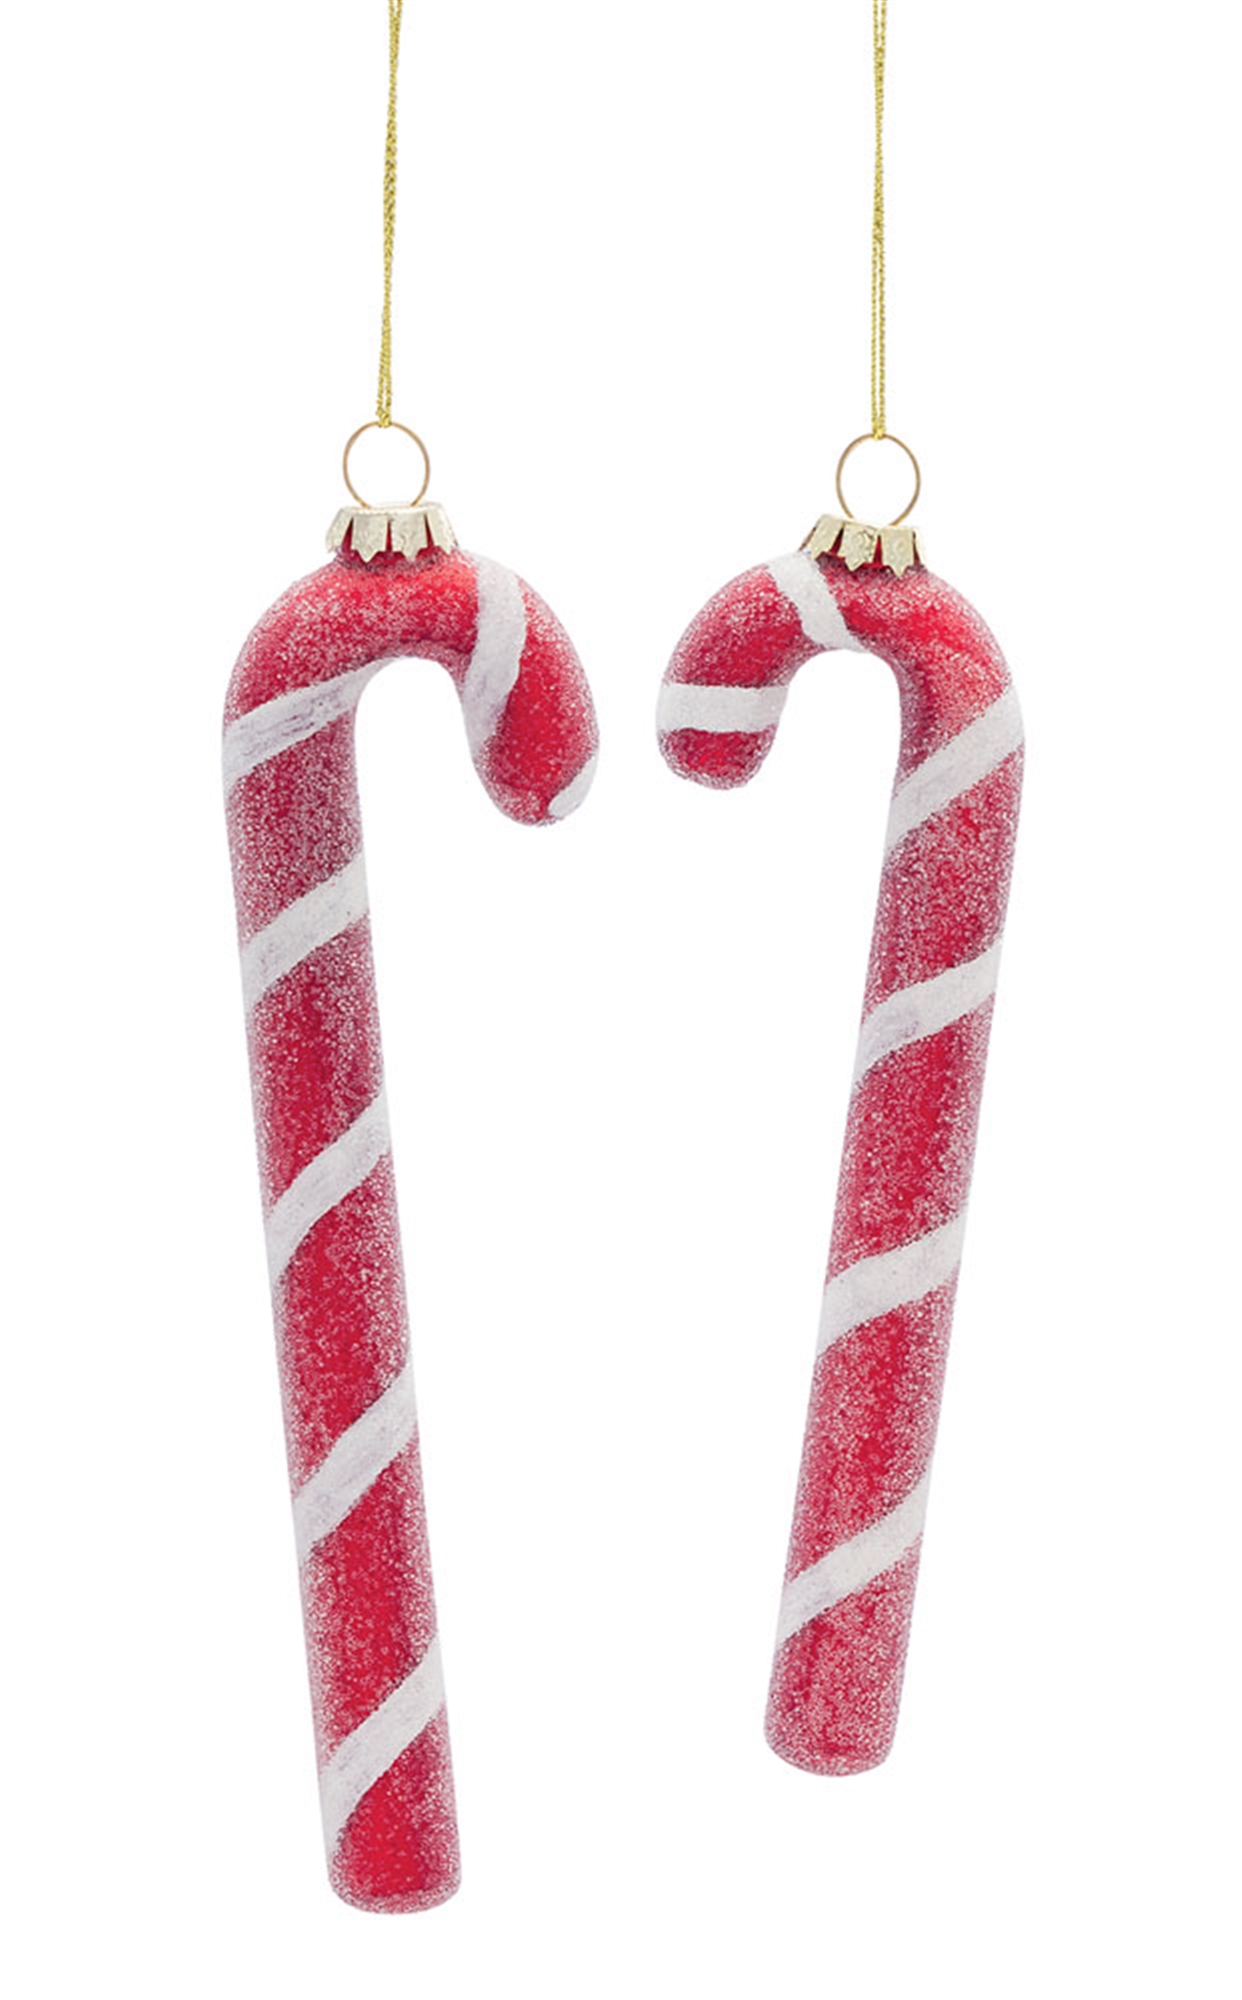 Candy Cane Ornament (Set of 12) 6.5"H, 7.25"H Glass